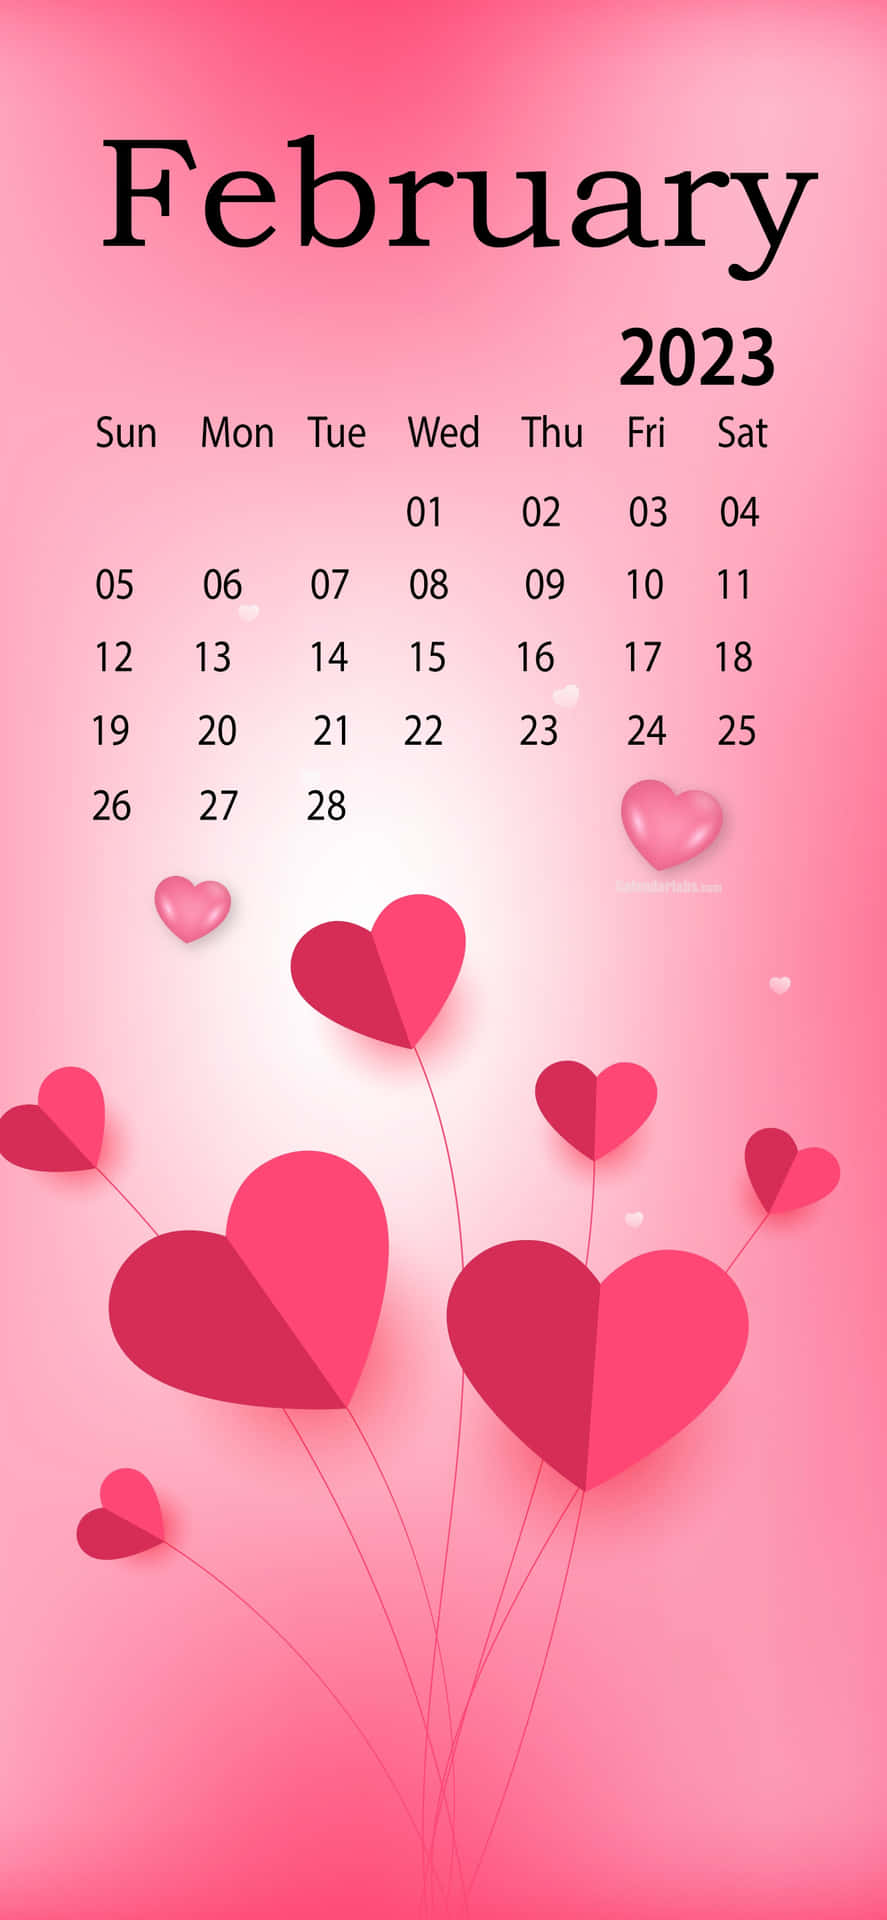 Get Organized for February with This Colorful Calendar Wallpaper